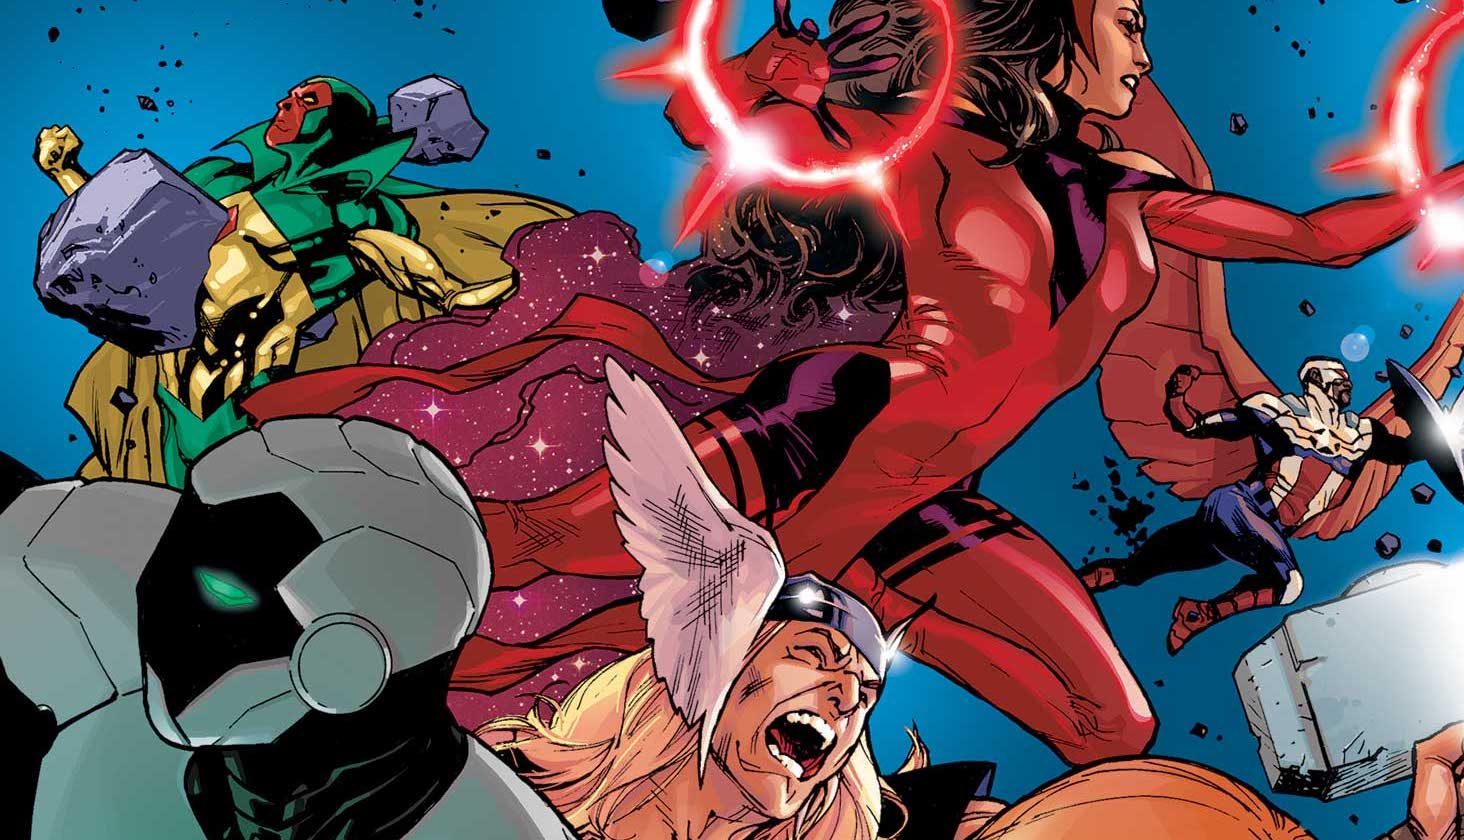 'Avengers' #6 cleverly puts a pin in each of the new Ashen Combine